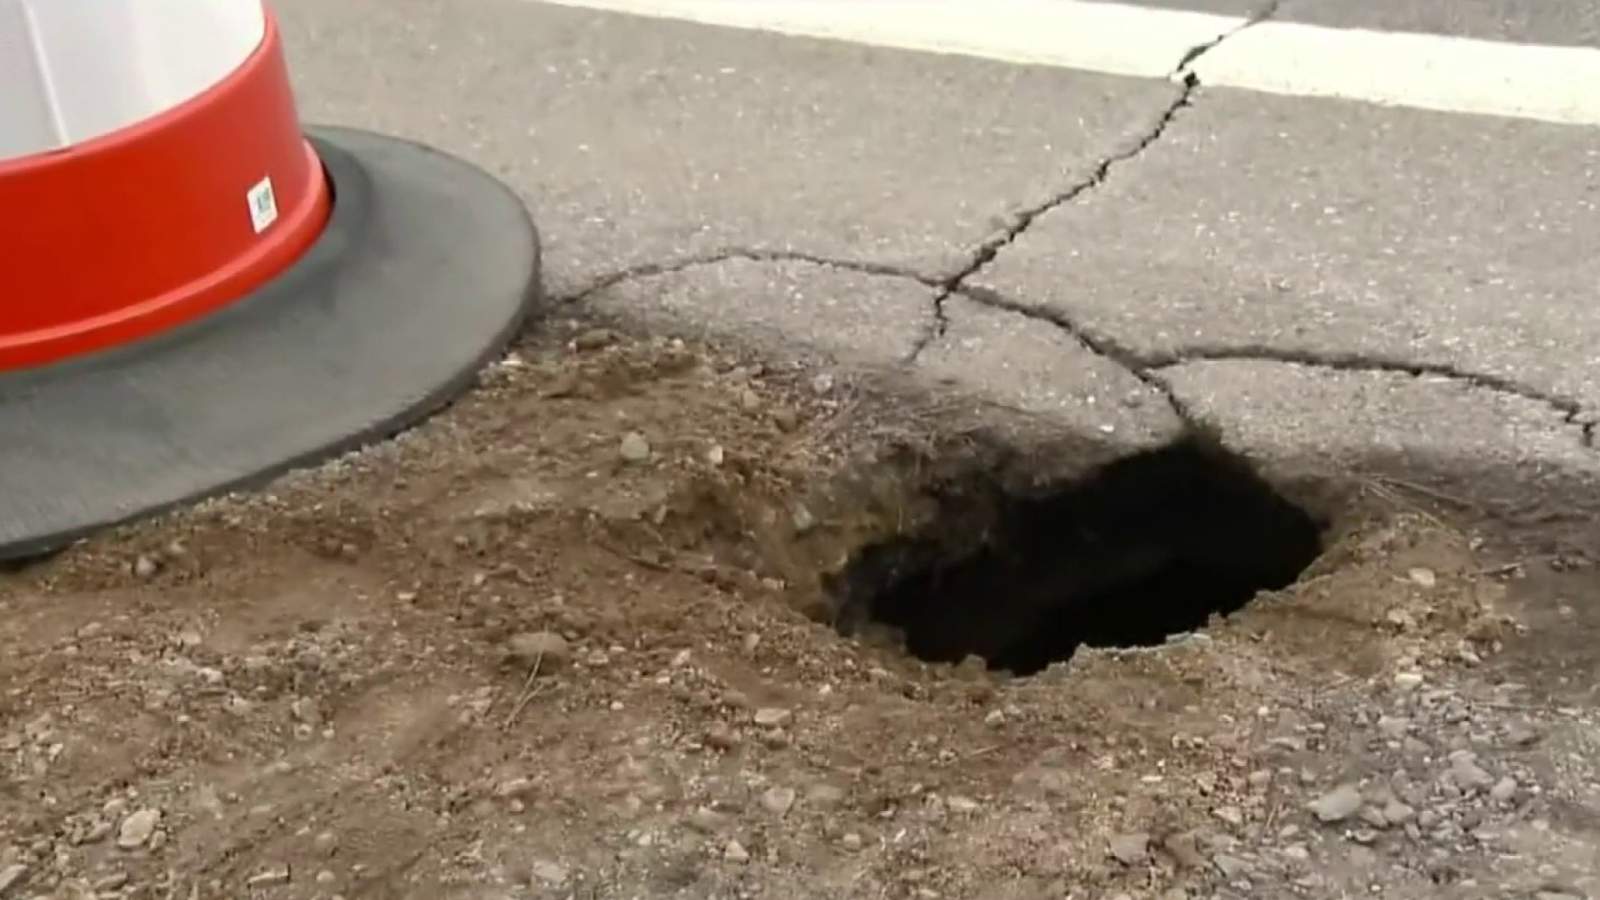 Road commission investigates sinkhole on busy Clarkston road after video goes viral